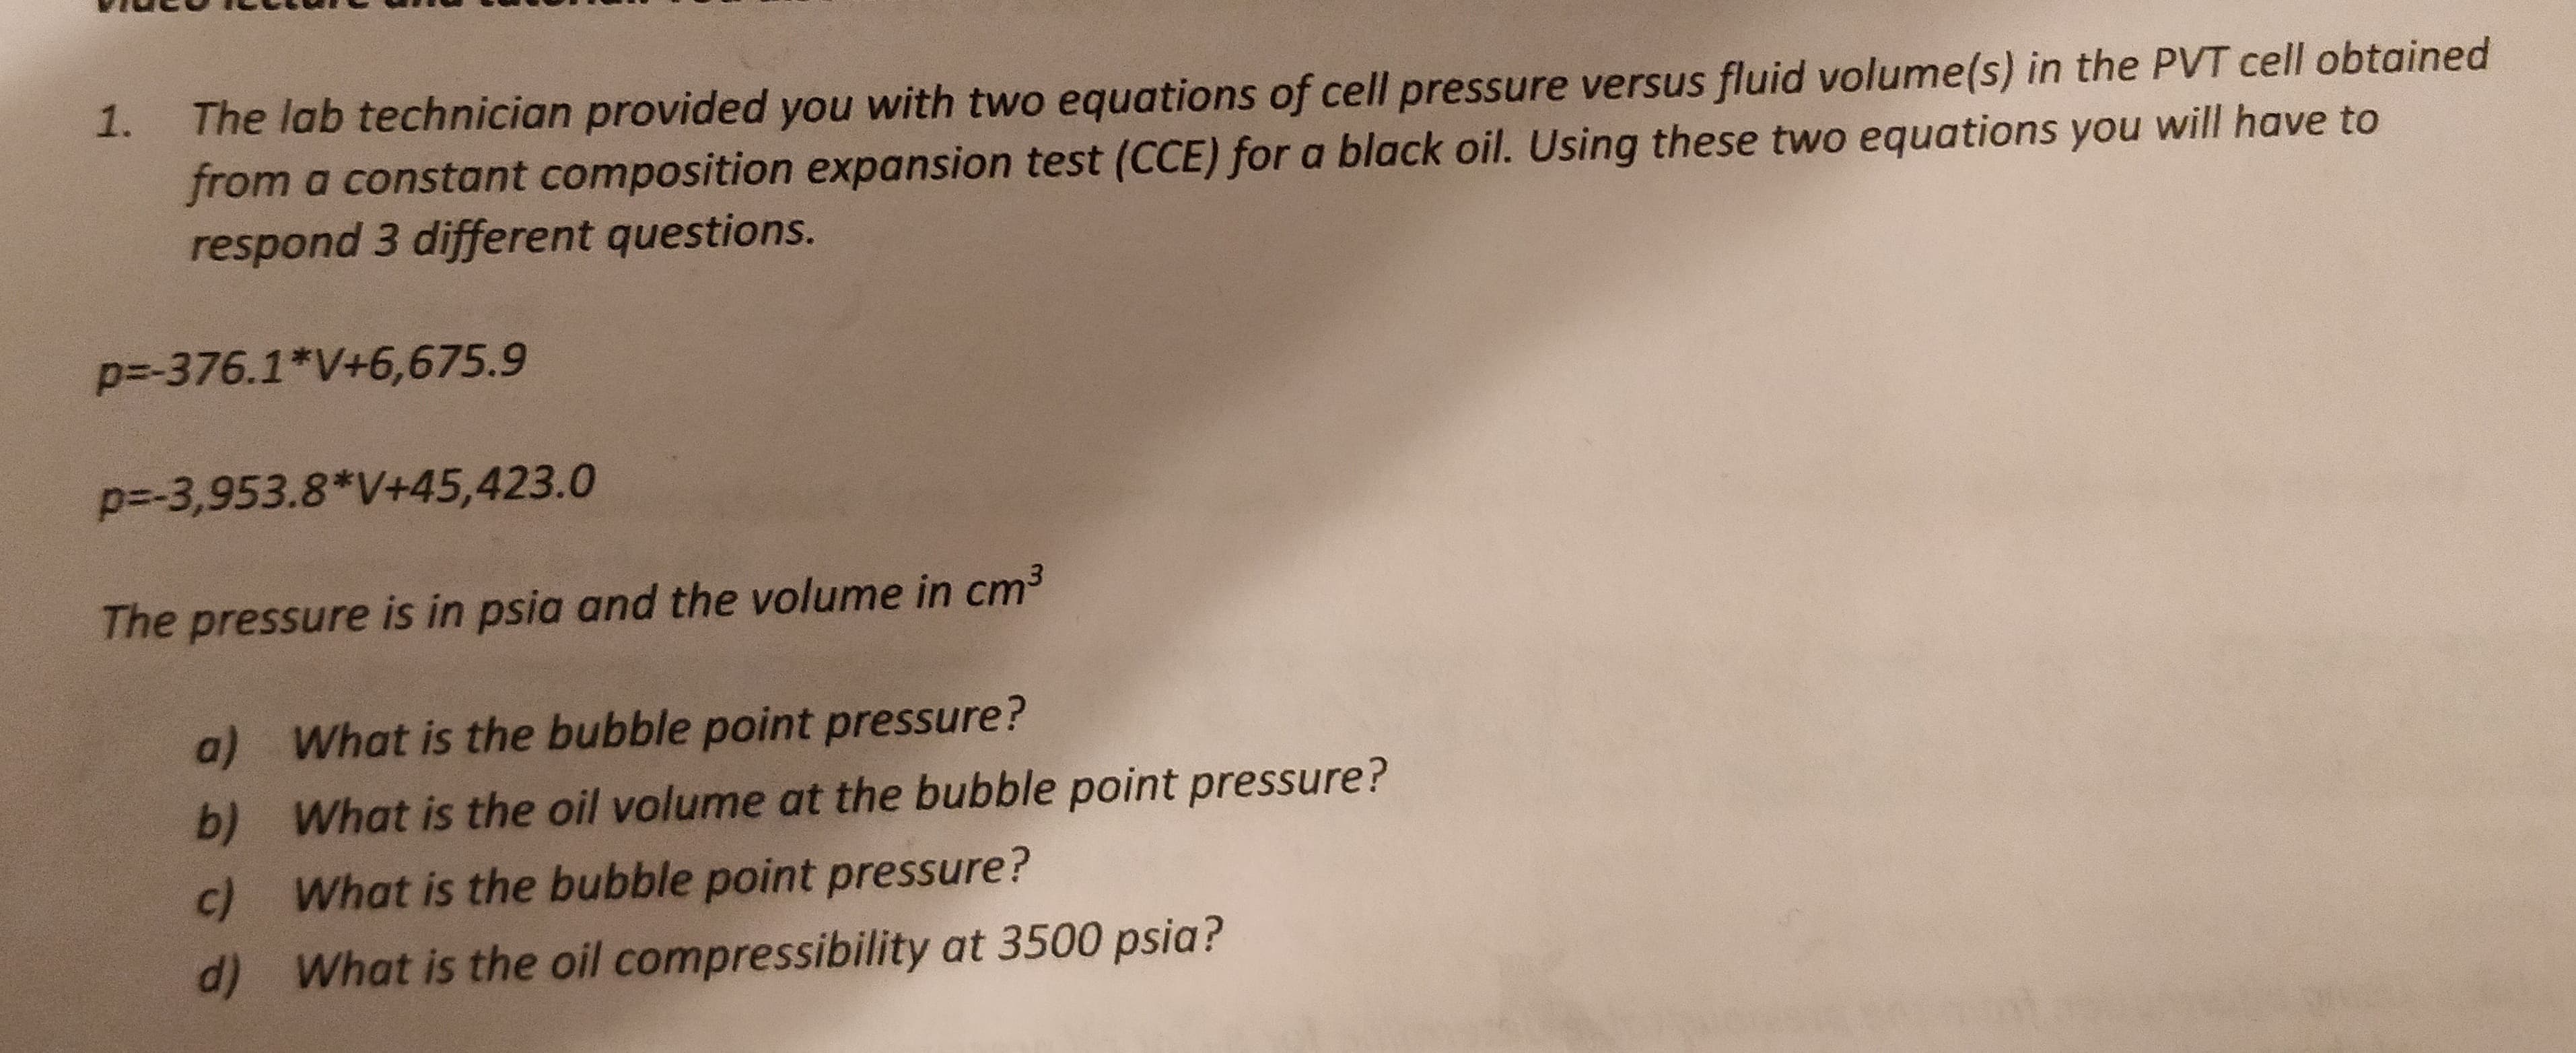 1.
The lab technician provided you with two equations of cell pressure versus fluid volume(s) in the PVT cell obtained
from a constant composition expansion test (CCE) for a black oil. Using these two equations you will have to
respond 3 different questions.
p=-376.1*V+6,675.9
p=-3,953.8*V+45,423.0
The pressure is in psia and the volume in cm3
What is the bubble point pressure?
a)
What is the oil volume at the bubble point pressure?
b)
What is the bubble point pressure?
c)
What is the oil compressibility at 3500 psia?
d)
